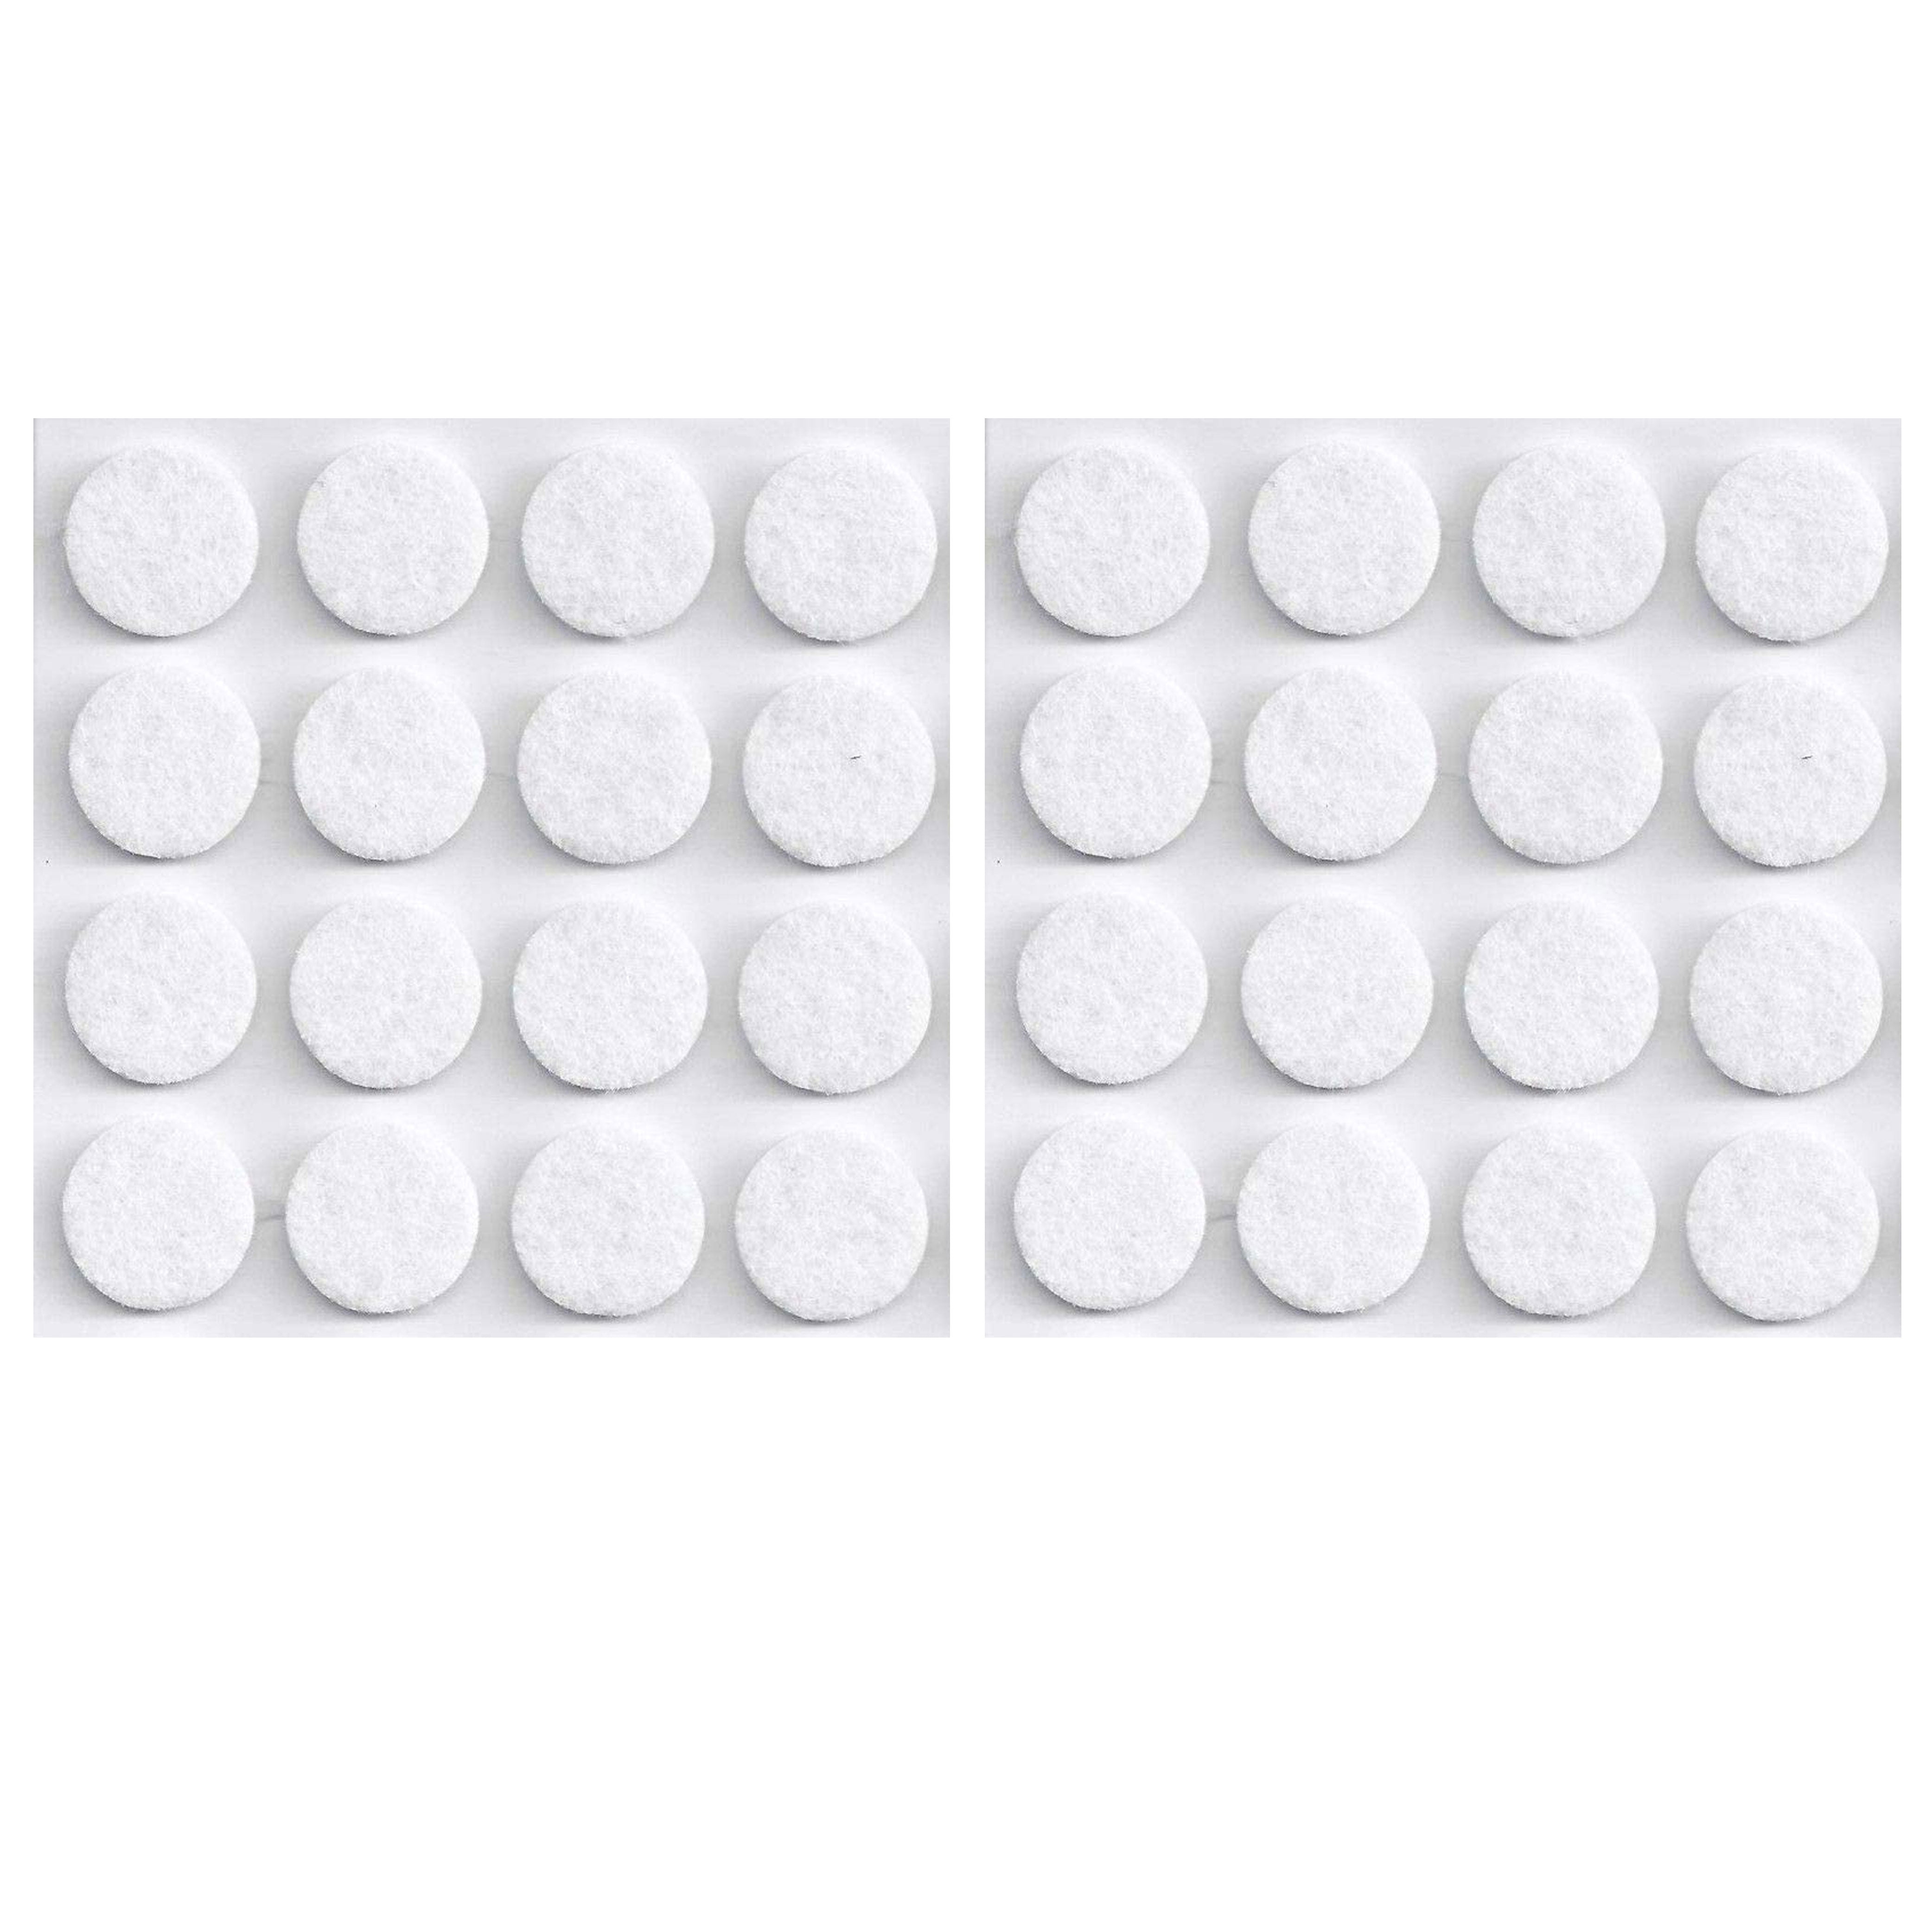 32 Self Adhesive Felt Pads Furniture Floor Scratch Craft Dot Protect White  0.75 